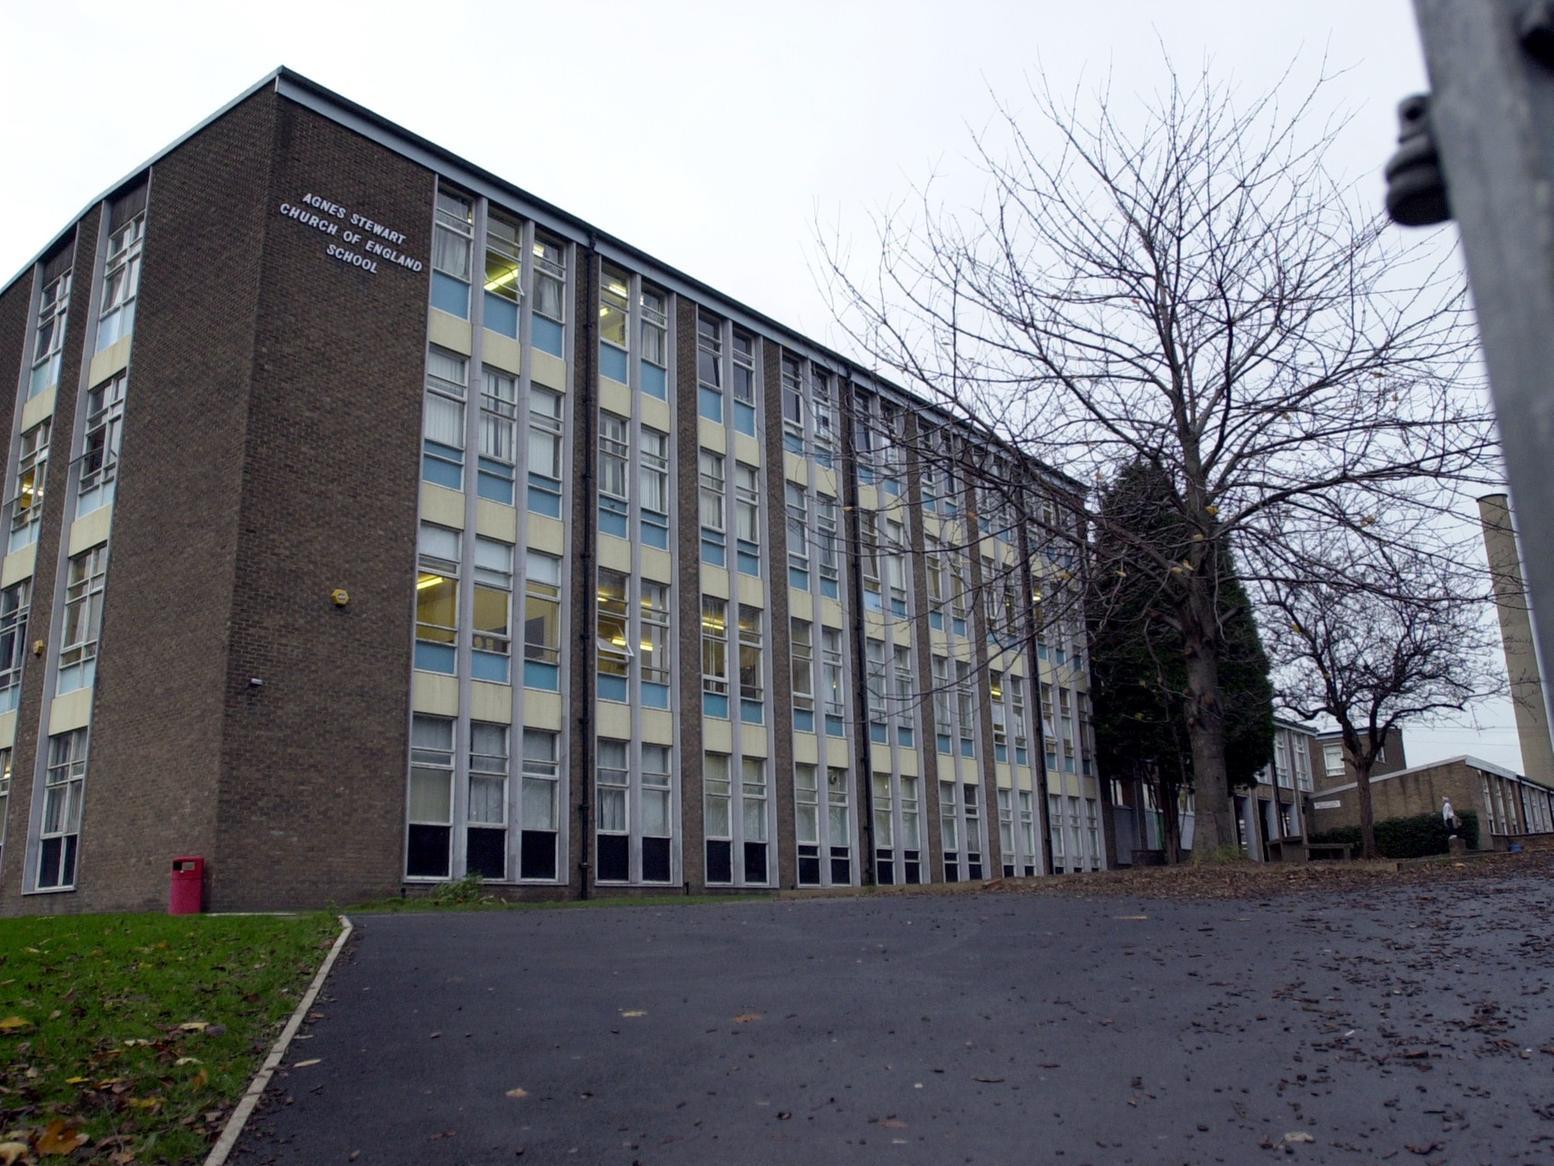 Teachers were threatening to refuse to teach 58 unruly pupils following a deterioration of discipline at Agnes Stewart CE High School in Leeds.